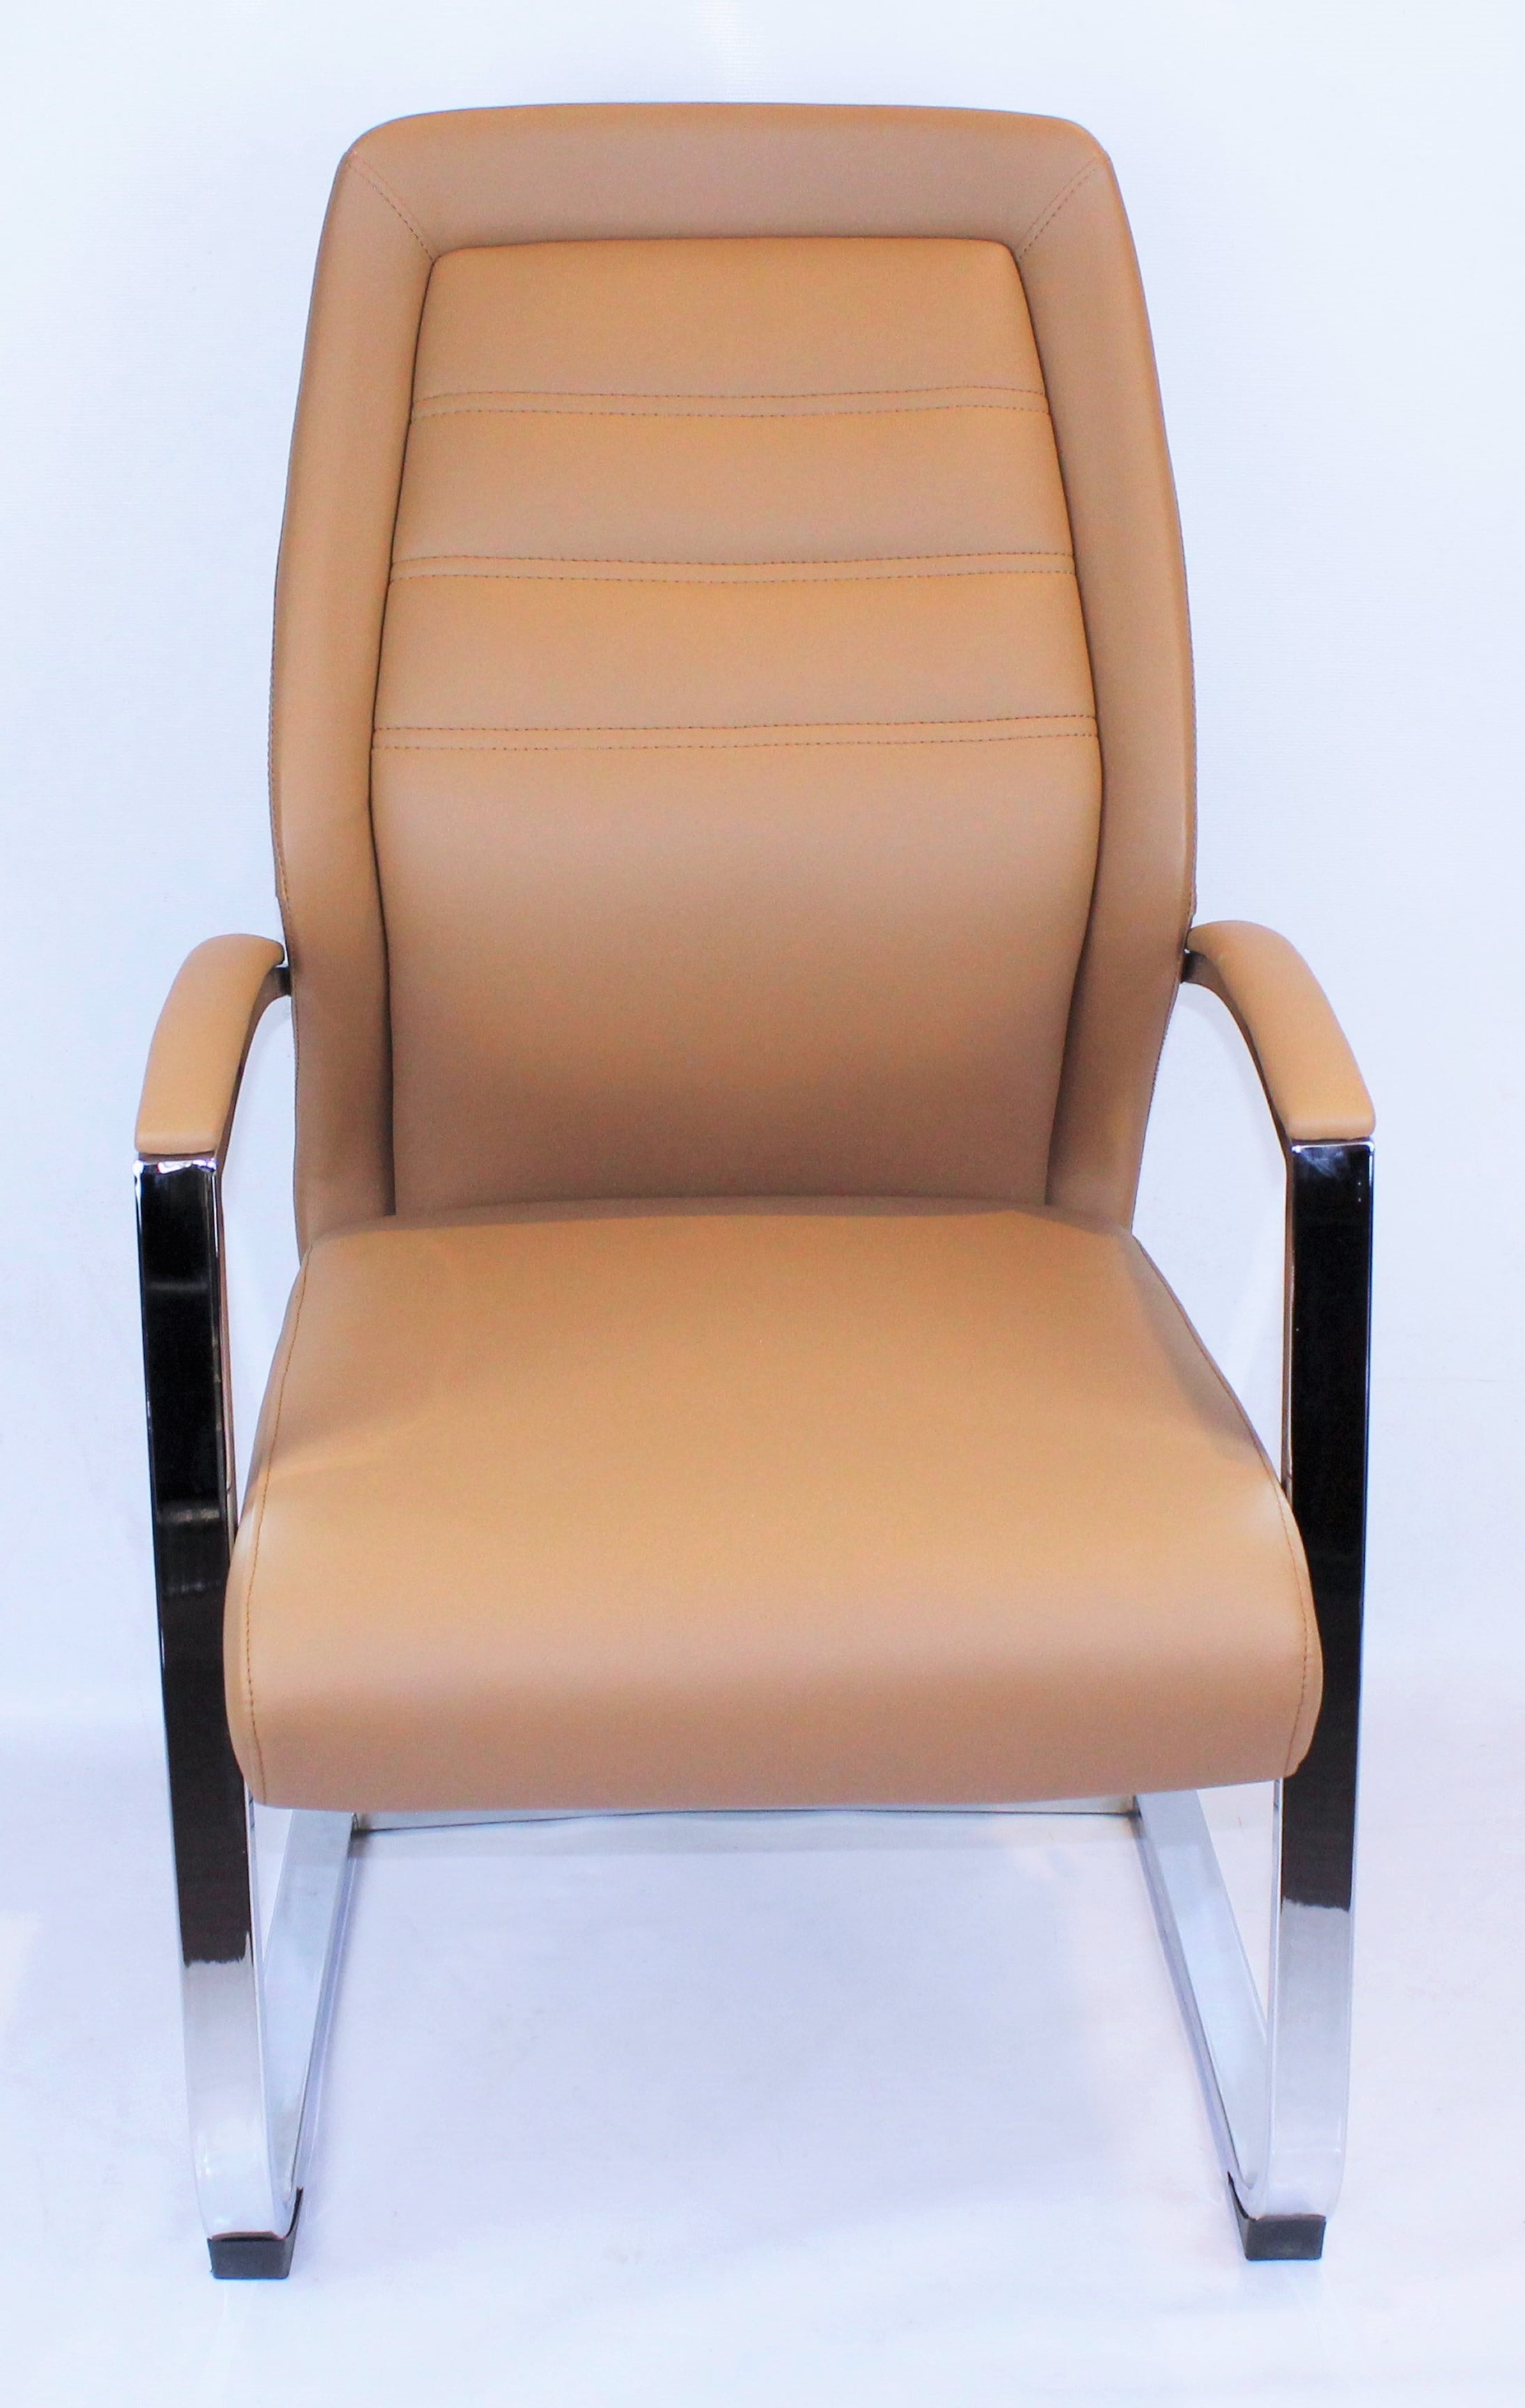 Modern Beige Leather Meeting Chairs - DH-103-2